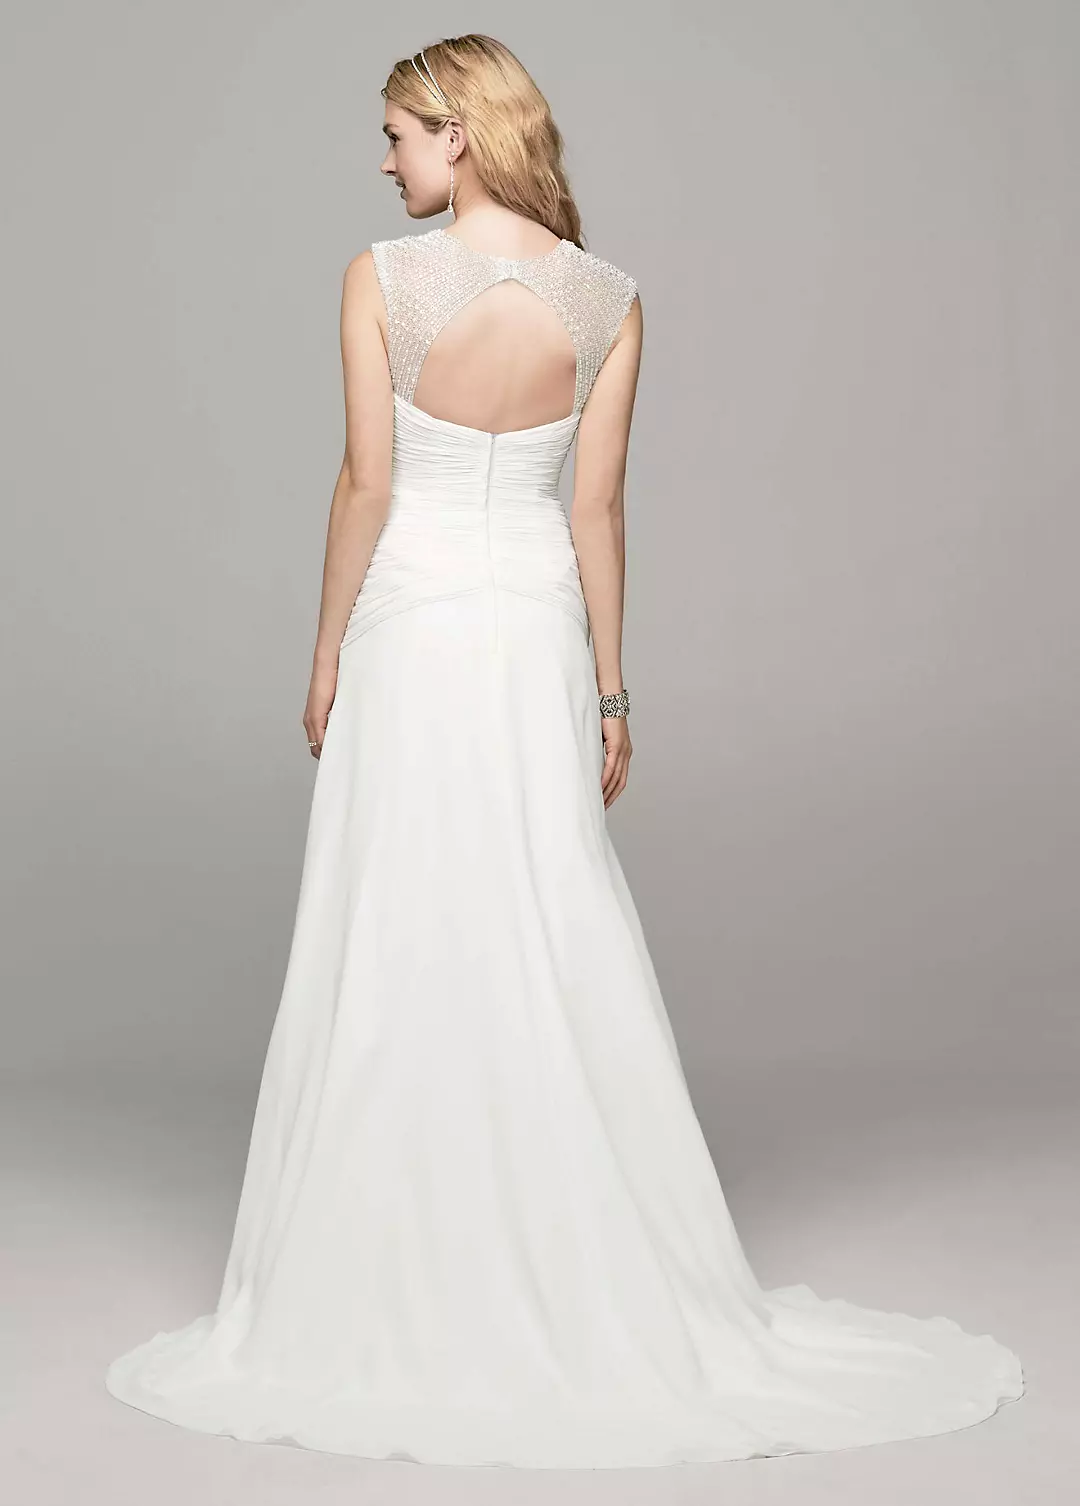 A-Line Wedding Dress with Beaded Cap Sleeve Detail Image 2